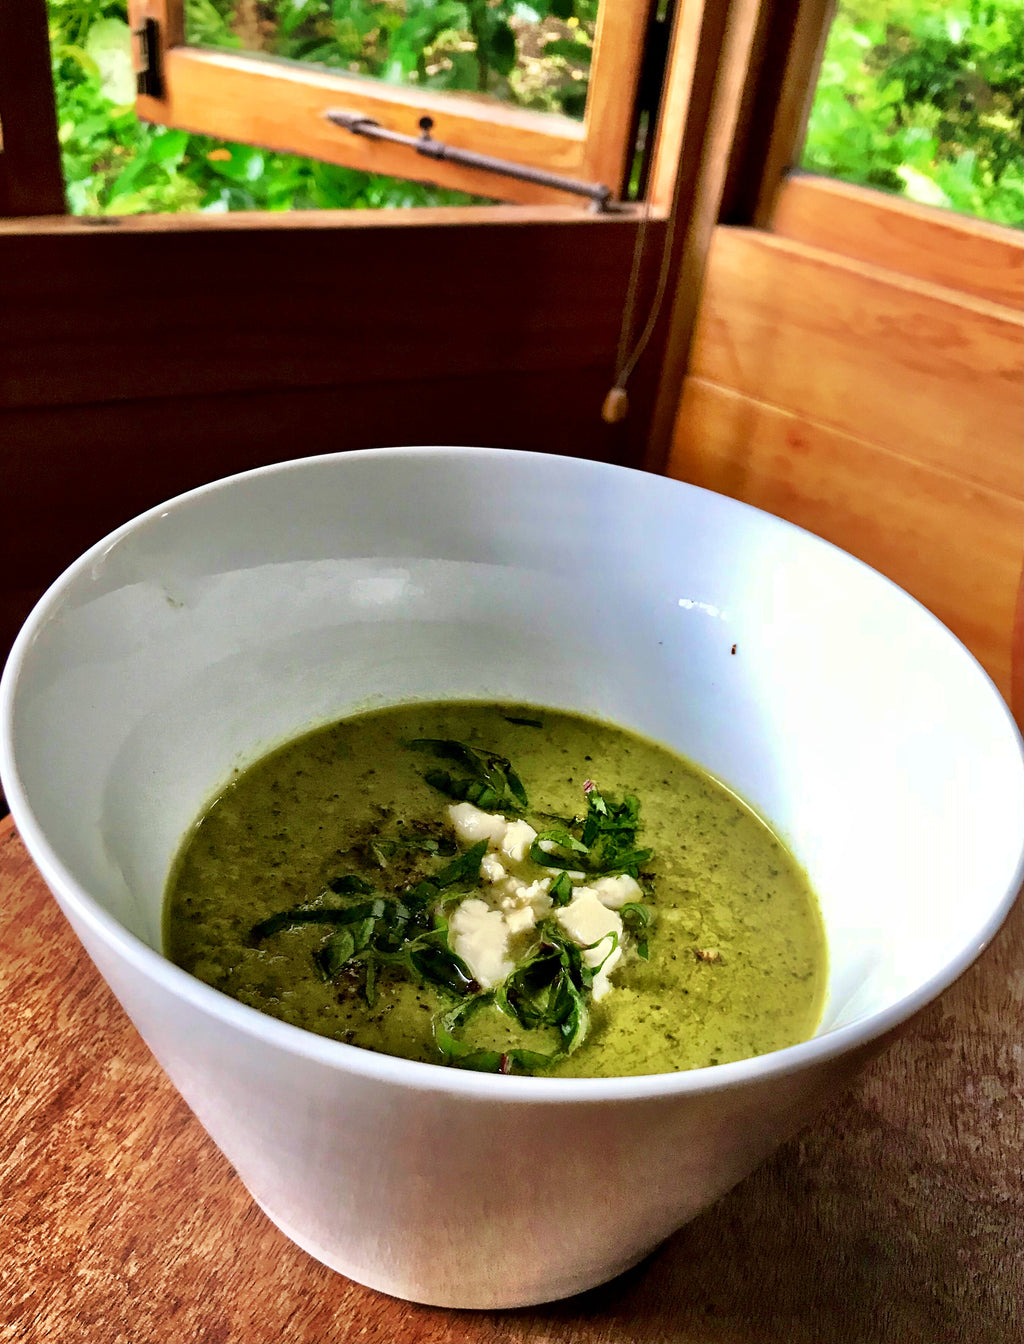 A bowl of broccoli Stilton cheese soup featuring a fragrant chicken broth and a generous serving of broccoli, enriched with the distinctive flavor of Stilton cheese